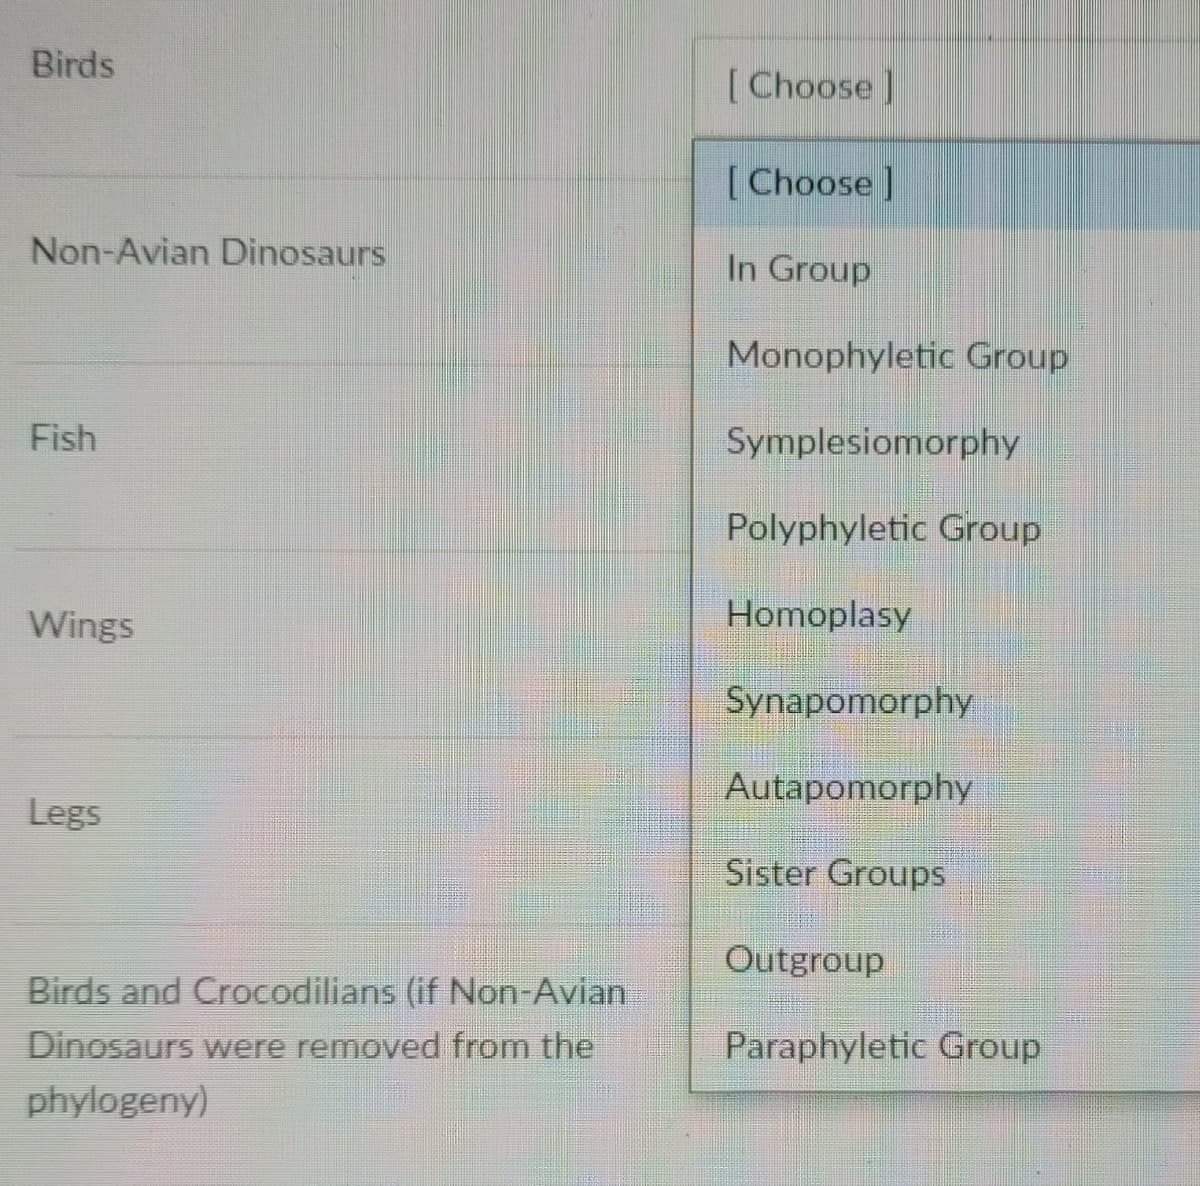 Birds
[Choose |
[Choose ]
Non-Avian Dinosaurs
In Group
Monophyletic Group
Fish
Symplesiomorphy
Polyphyletic Group
Wings
Homoplasy
Synapomorphy
Autapomorphy
Legs
Sister Groups
Outgroup
Birds and Crocodilians (if Non-Avian
Dinosaurs were removed from the
Paraphyletic Group
phylogeny)
